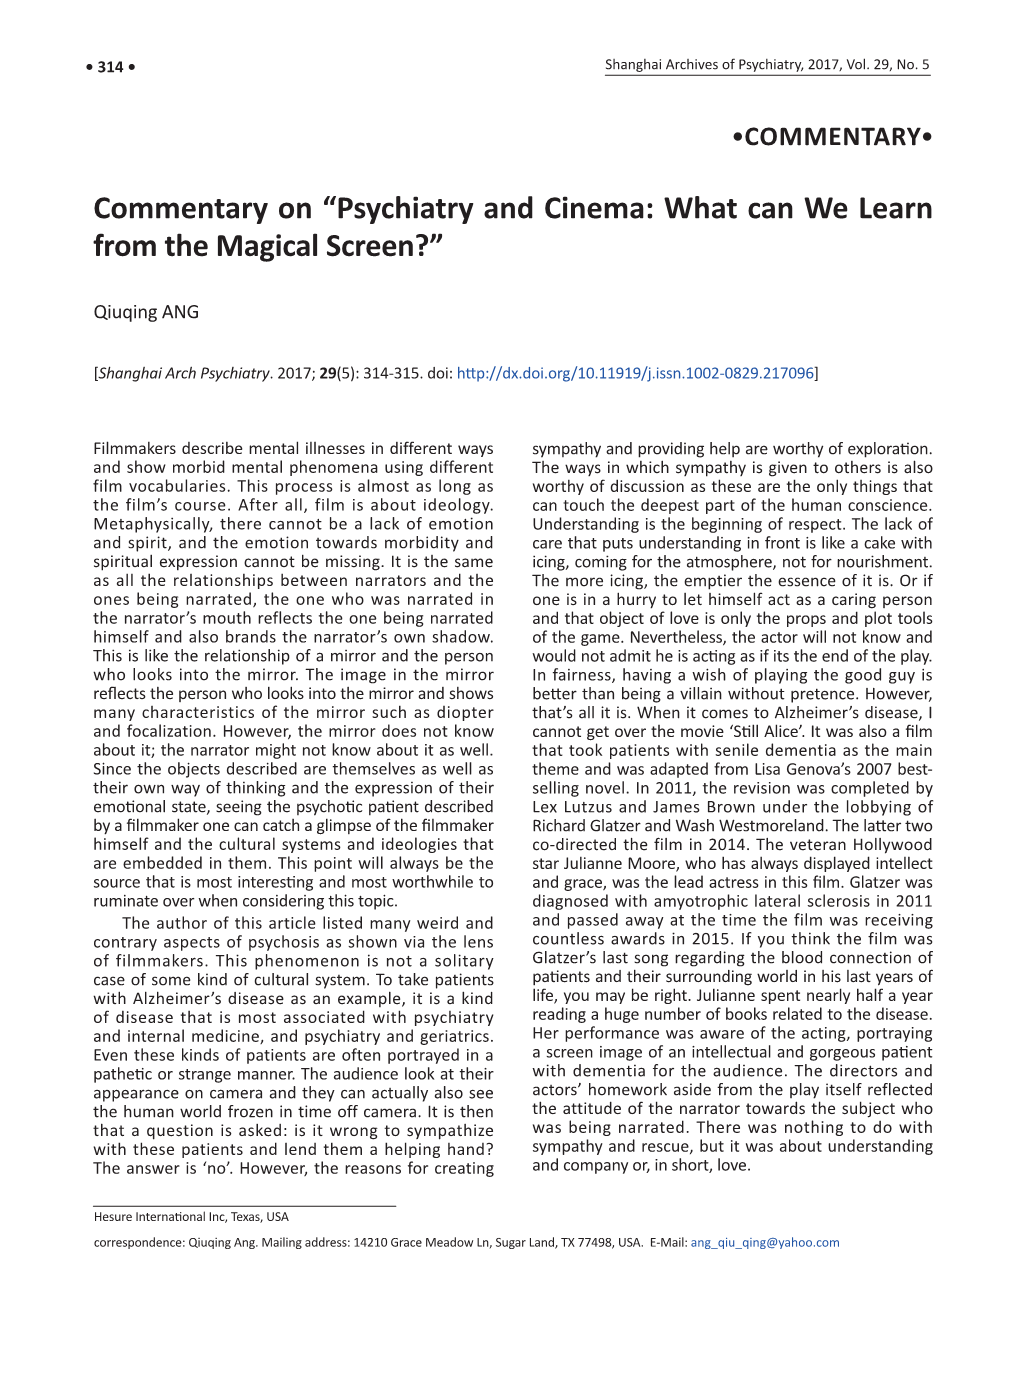 Commentary on “Psychiatry and Cinema: What Can We Learn from the Magical Screen?”